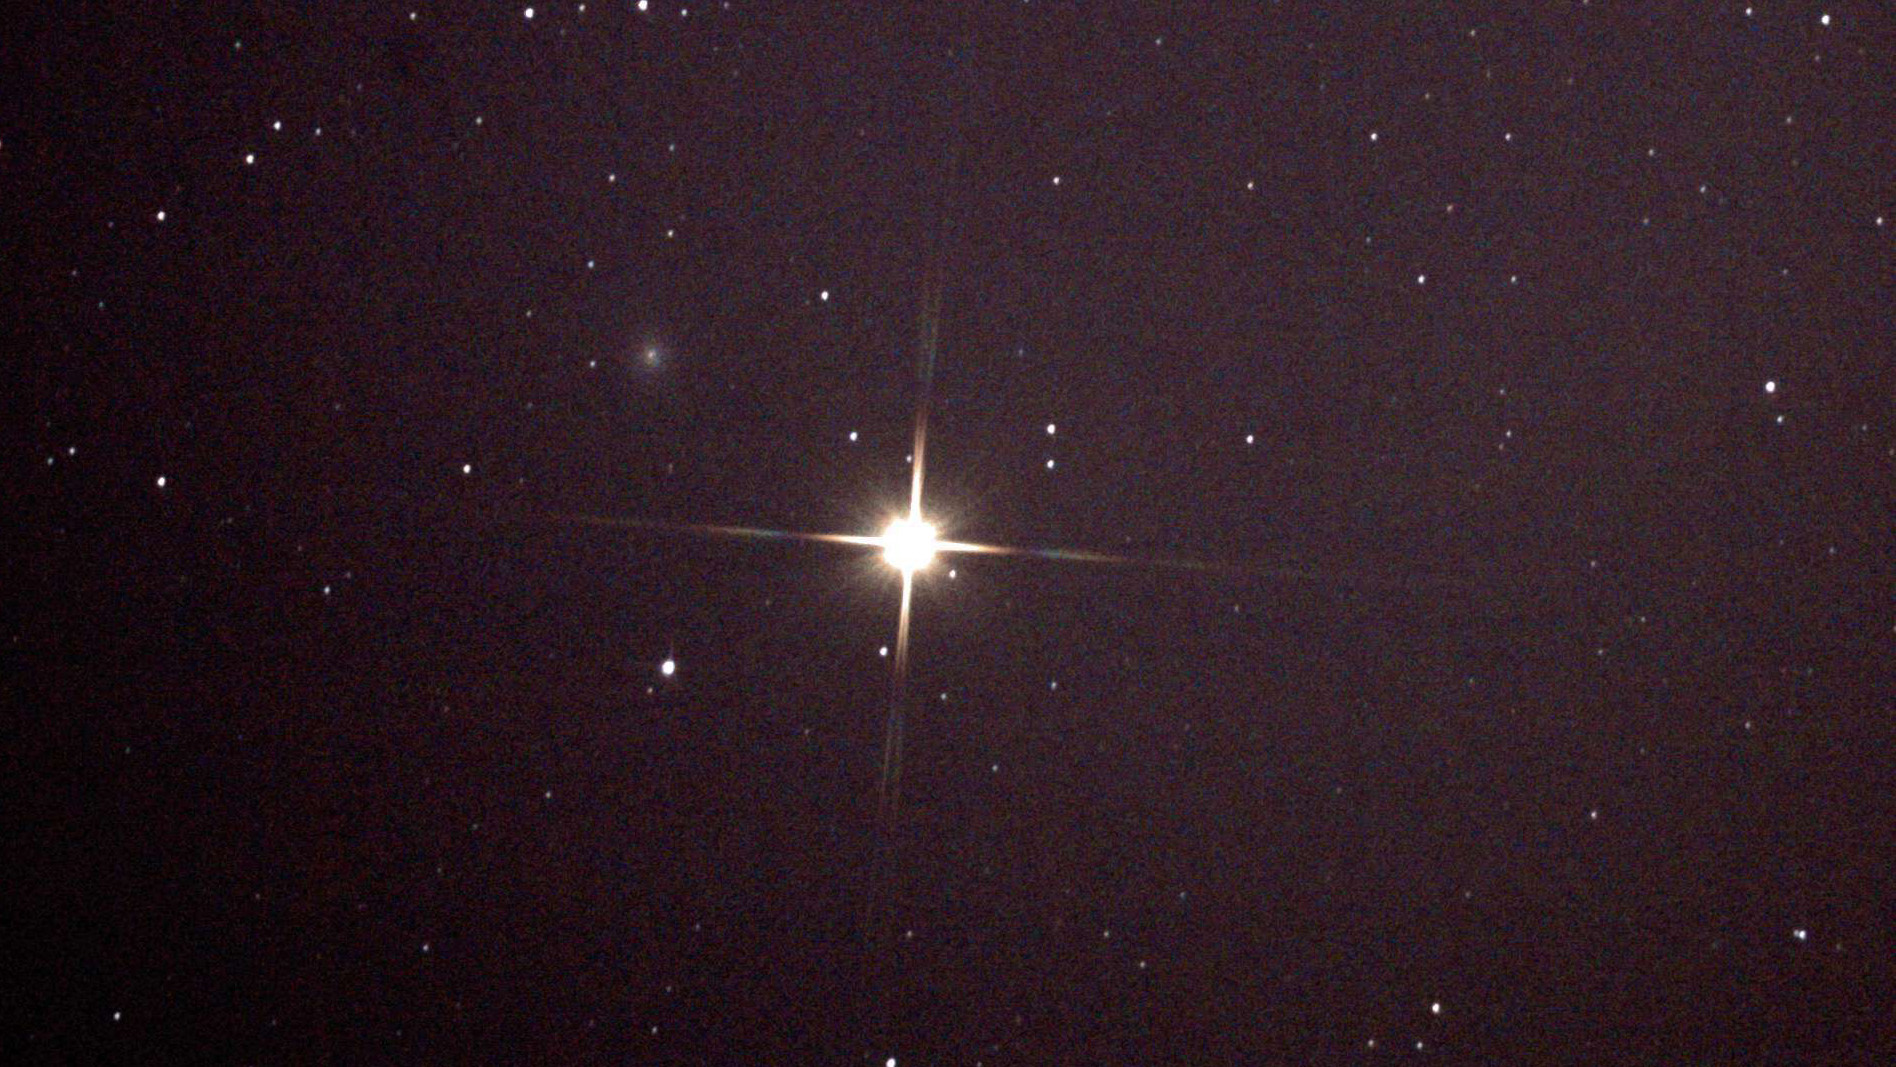 Mirach is one of the brightest stars of the Andromeda constellation.